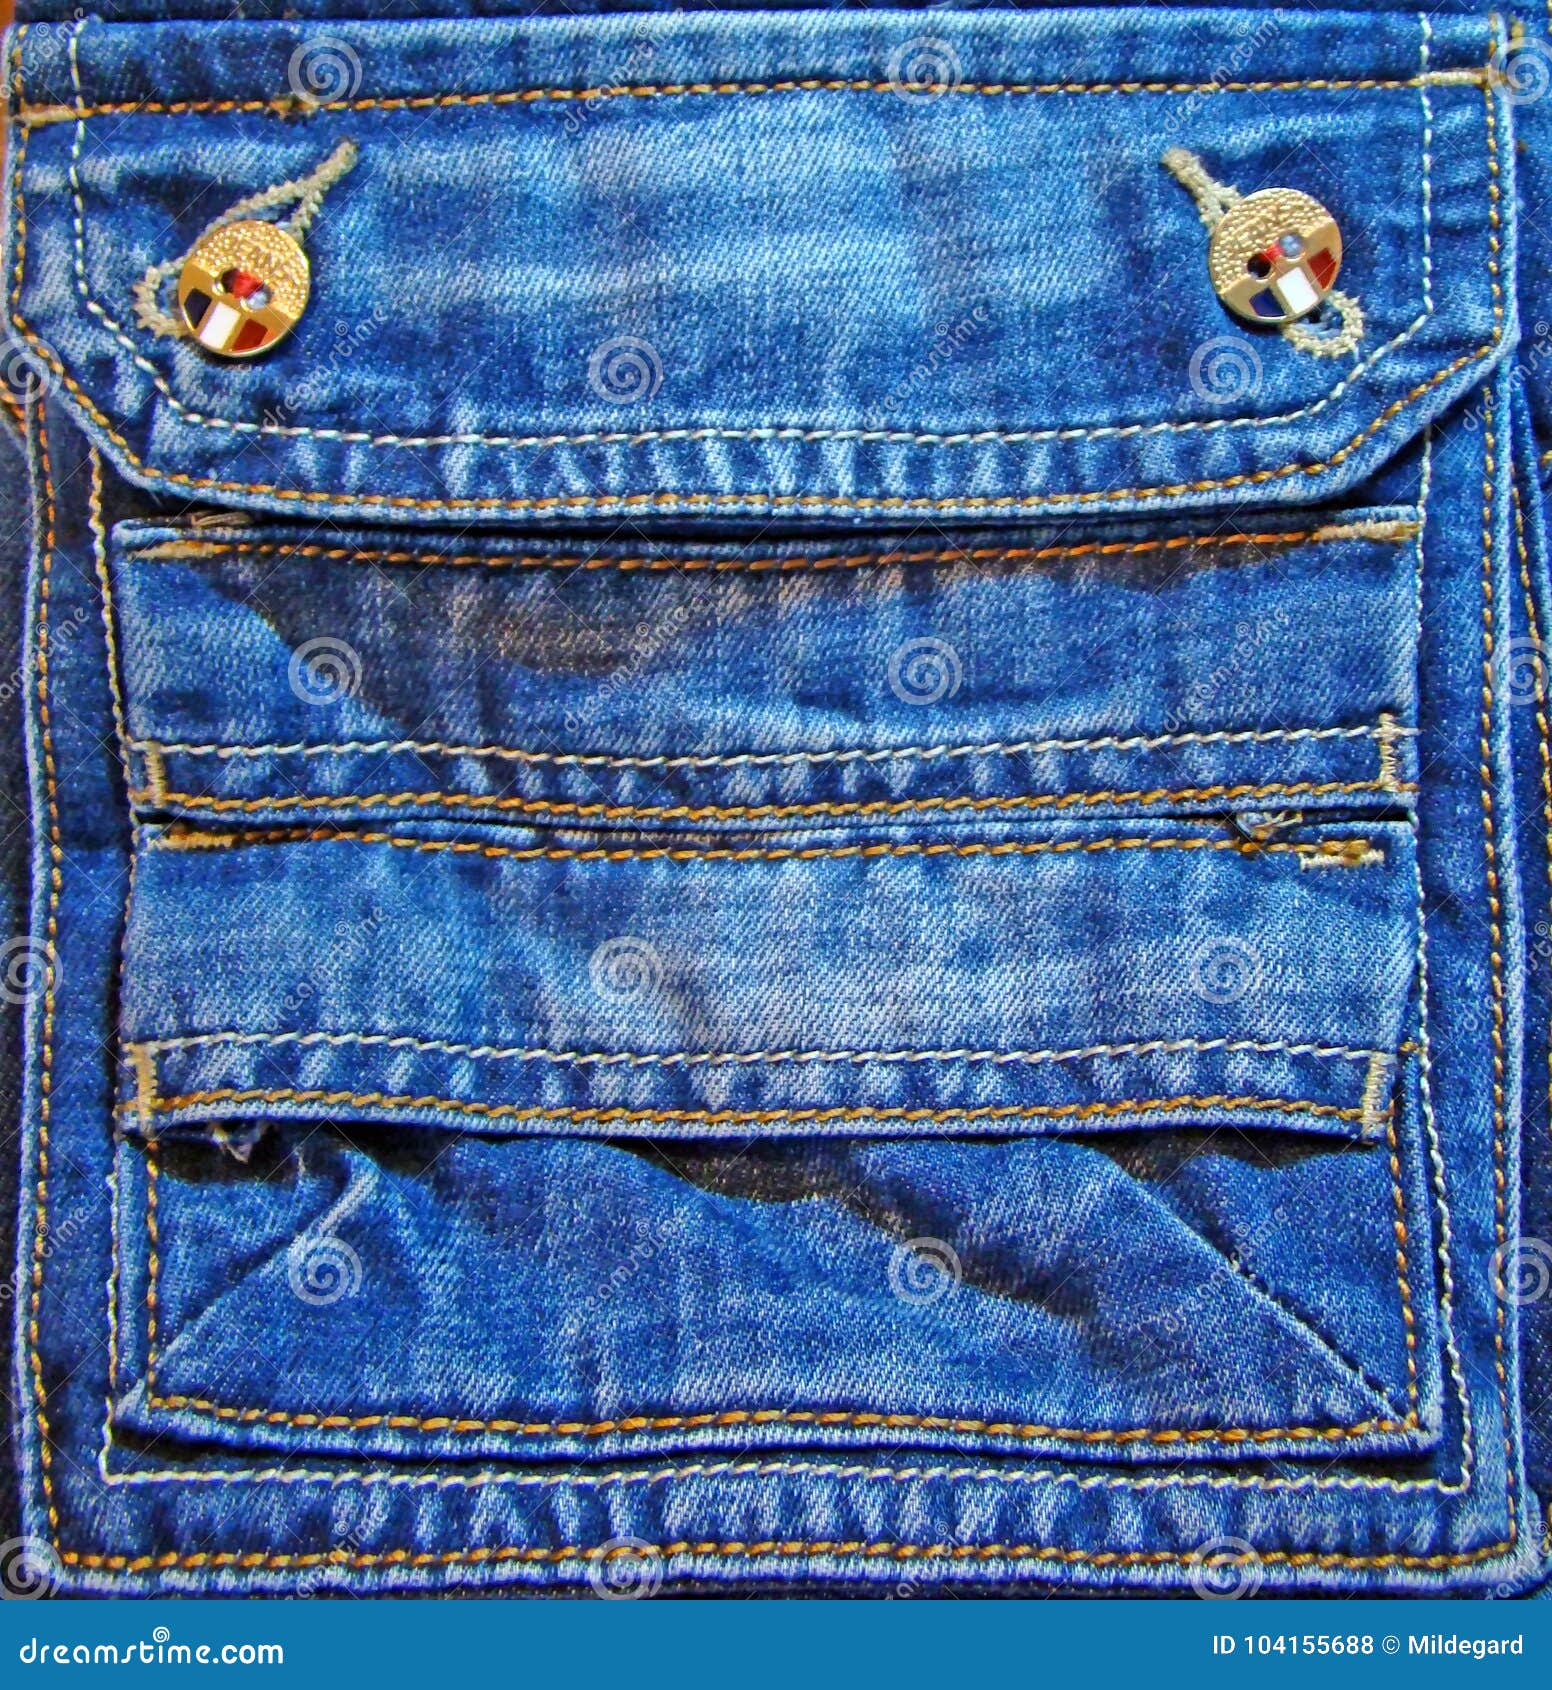 Why Do Jeans Pockets Have Tiny Buttons On Them?